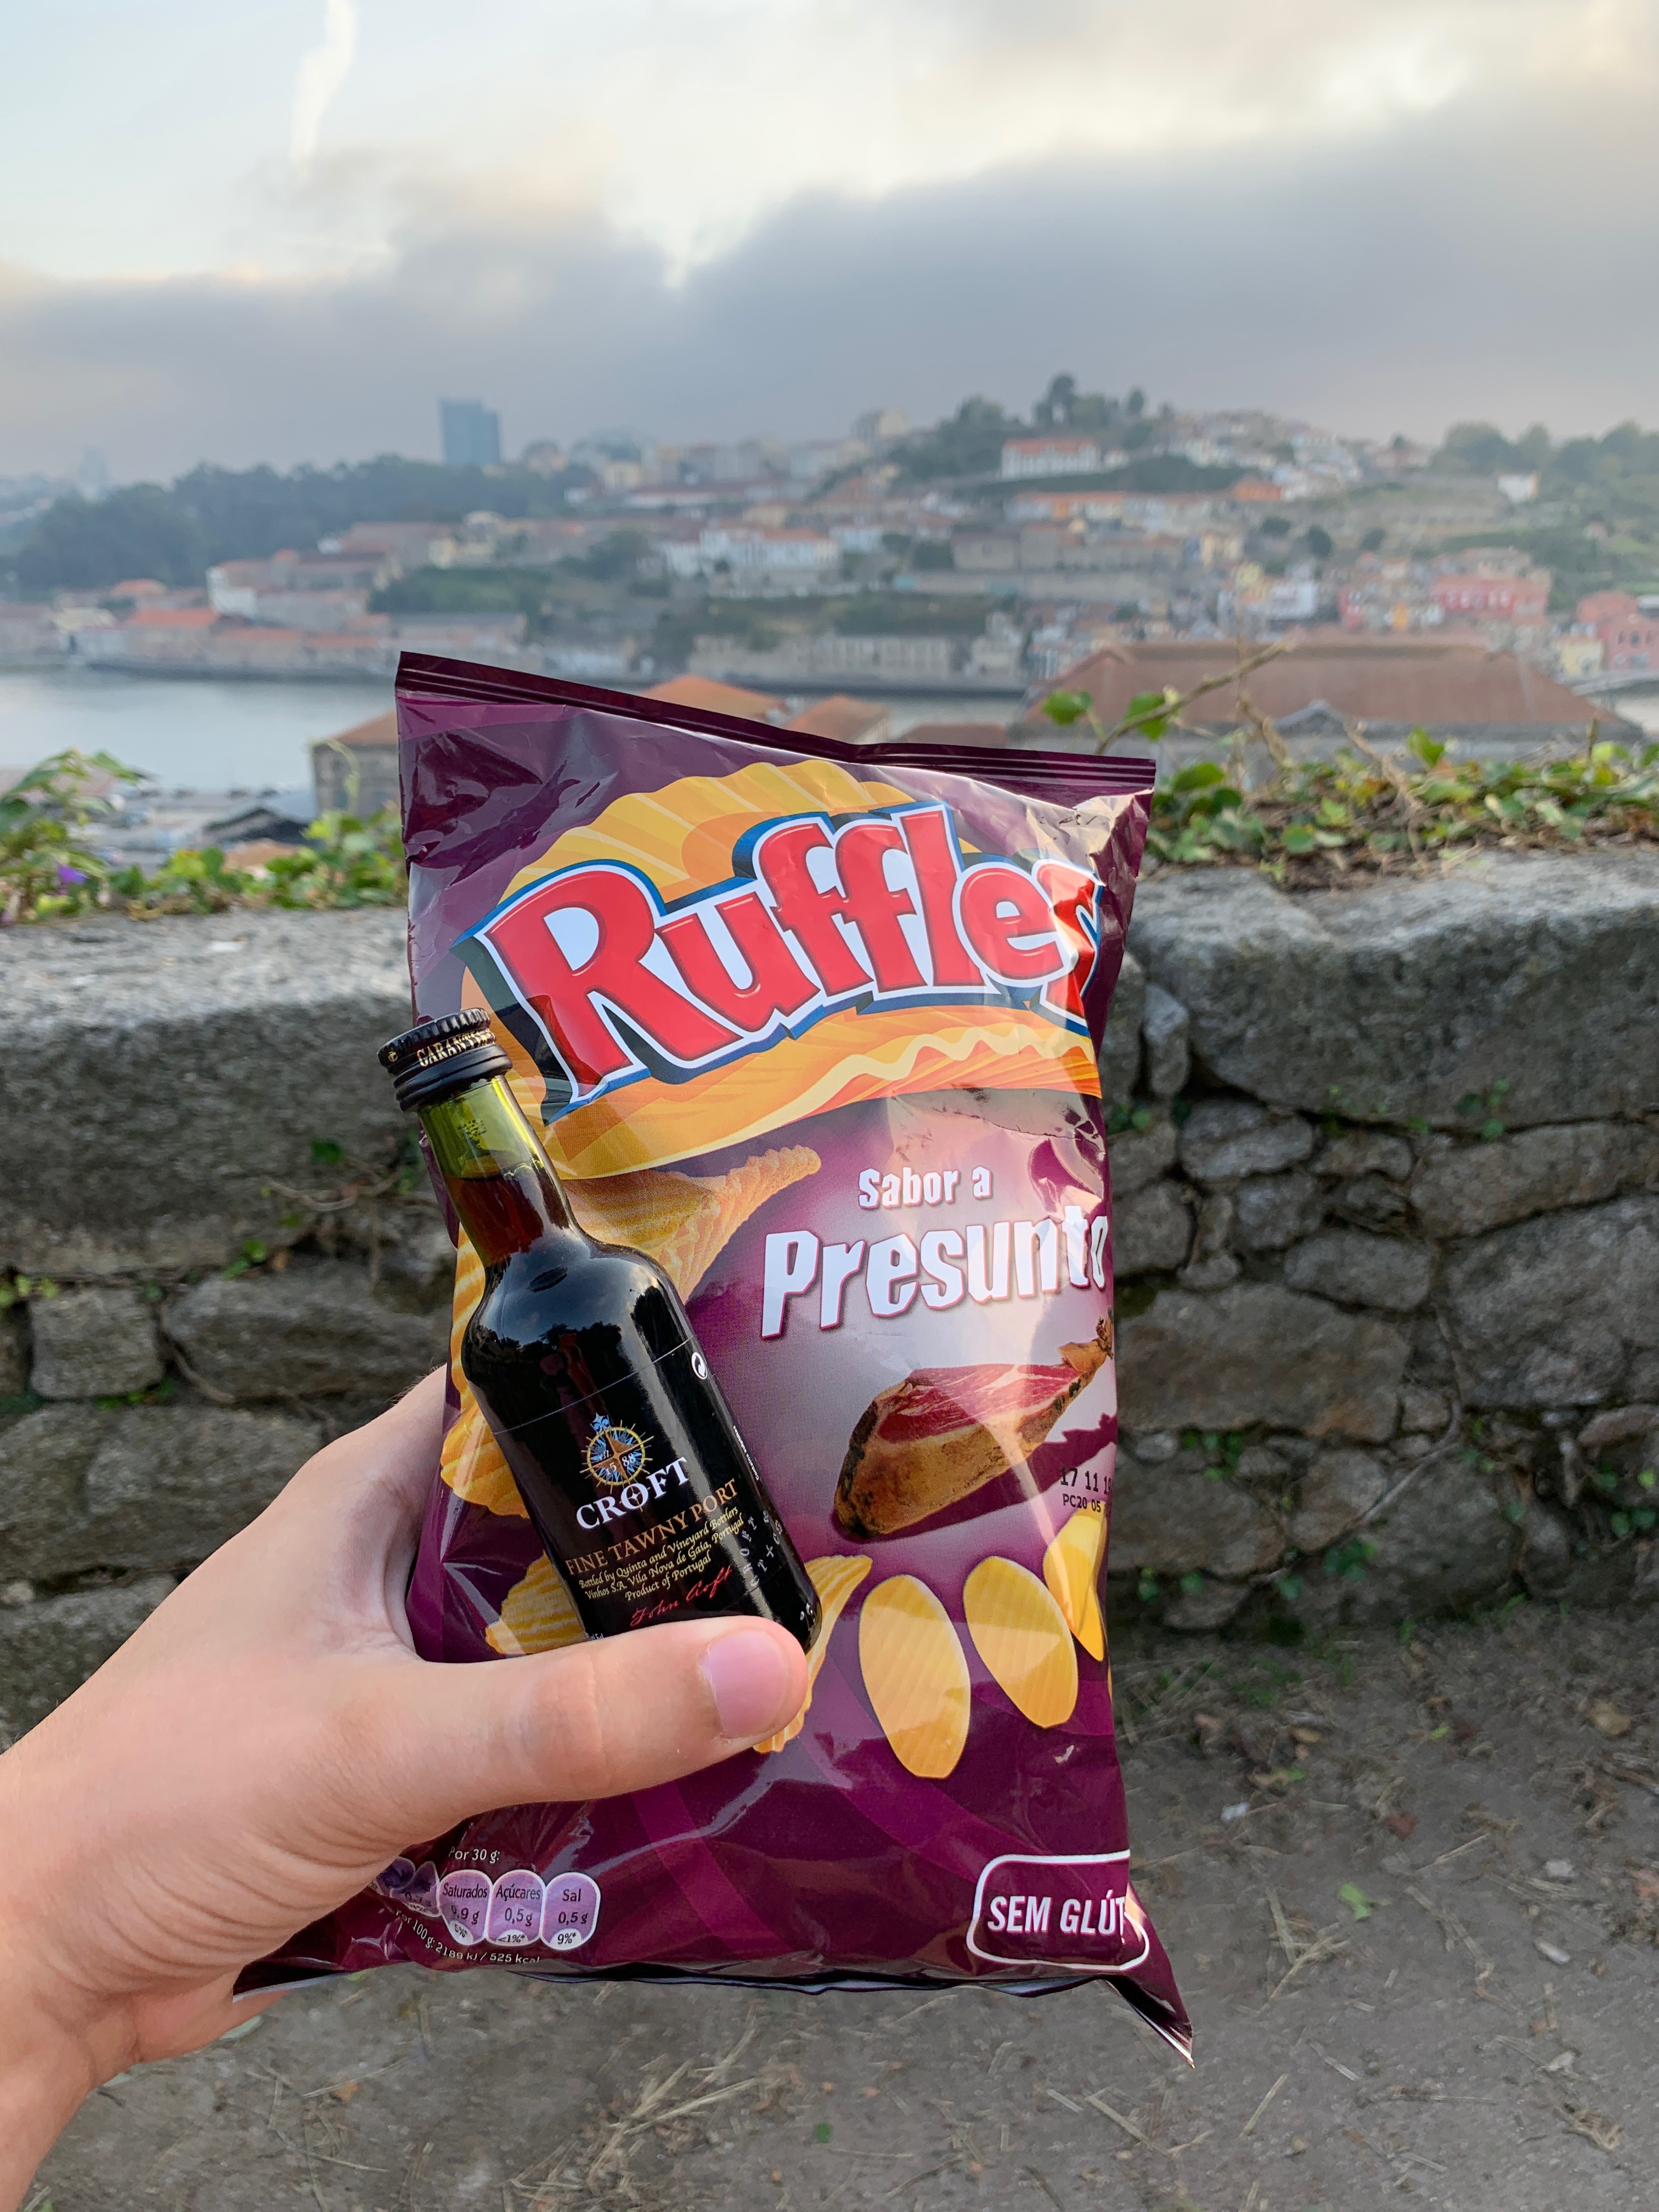 A mini bottle of port and chips with the Douro river in the background